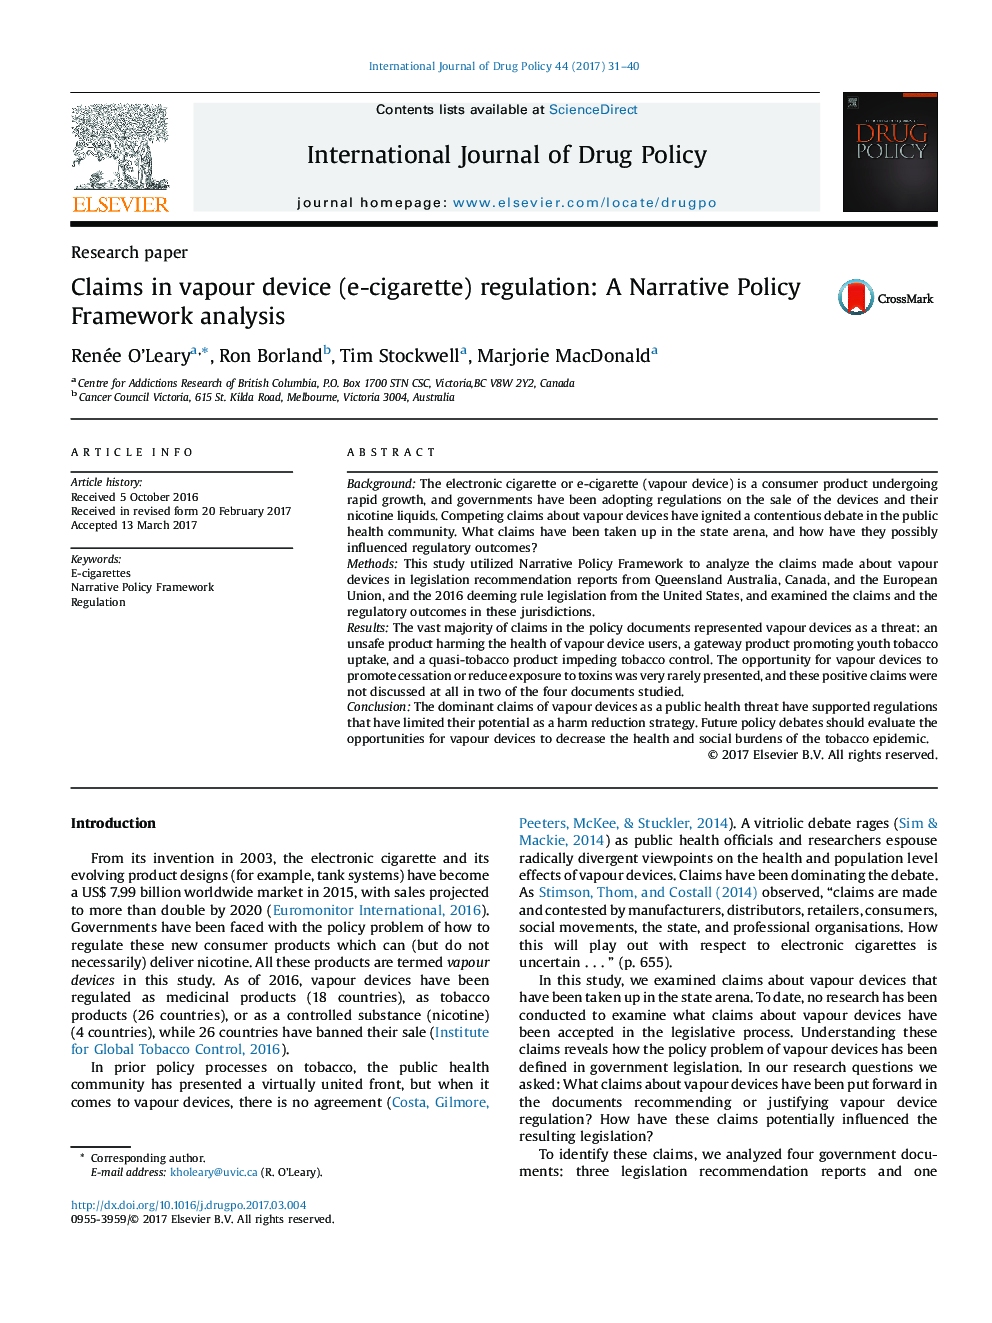 Claims in vapour device (e-cigarette) regulation: A Narrative Policy Framework analysis